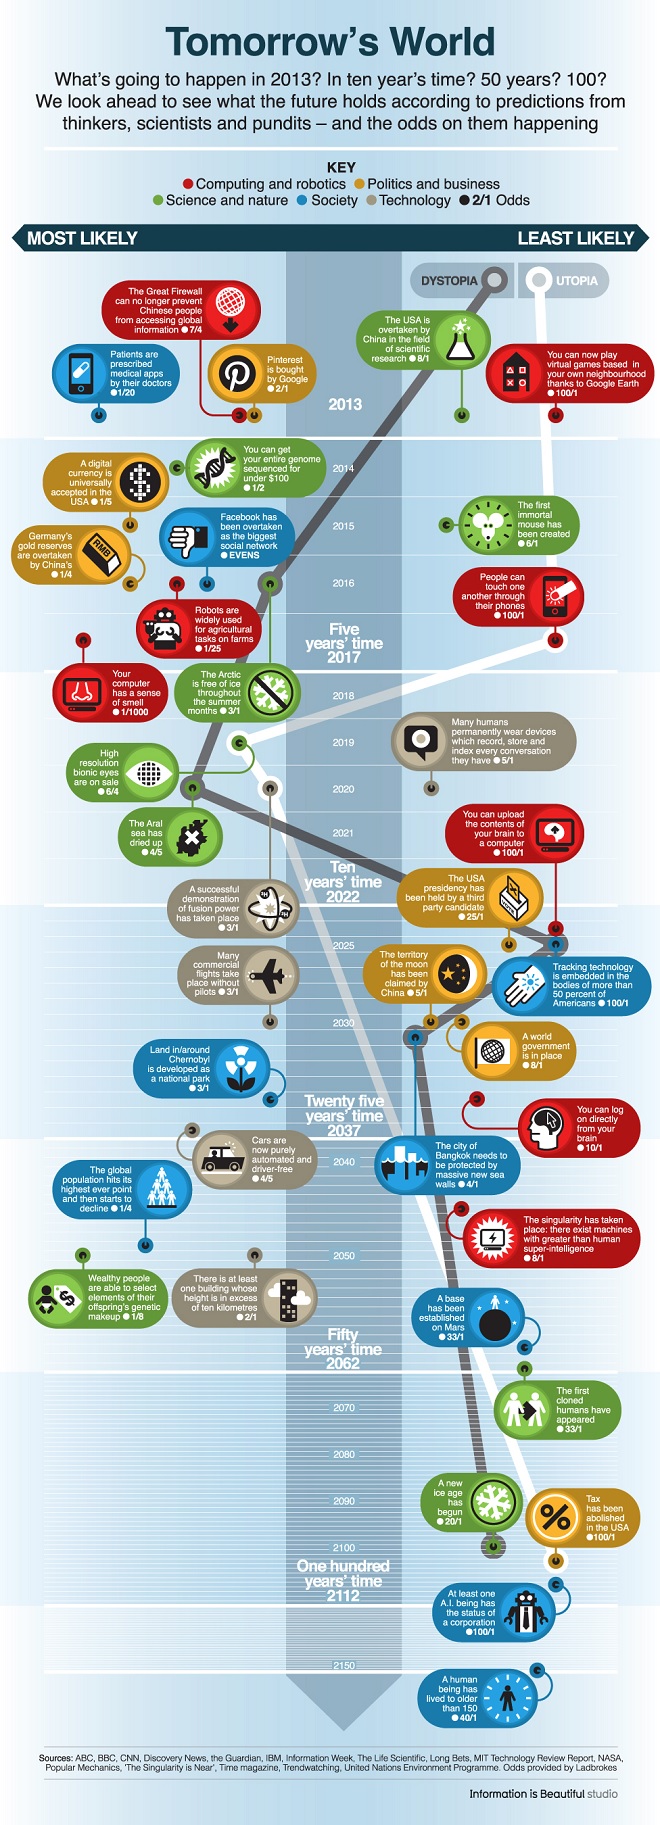 Infographic Predicting the Future of Tech